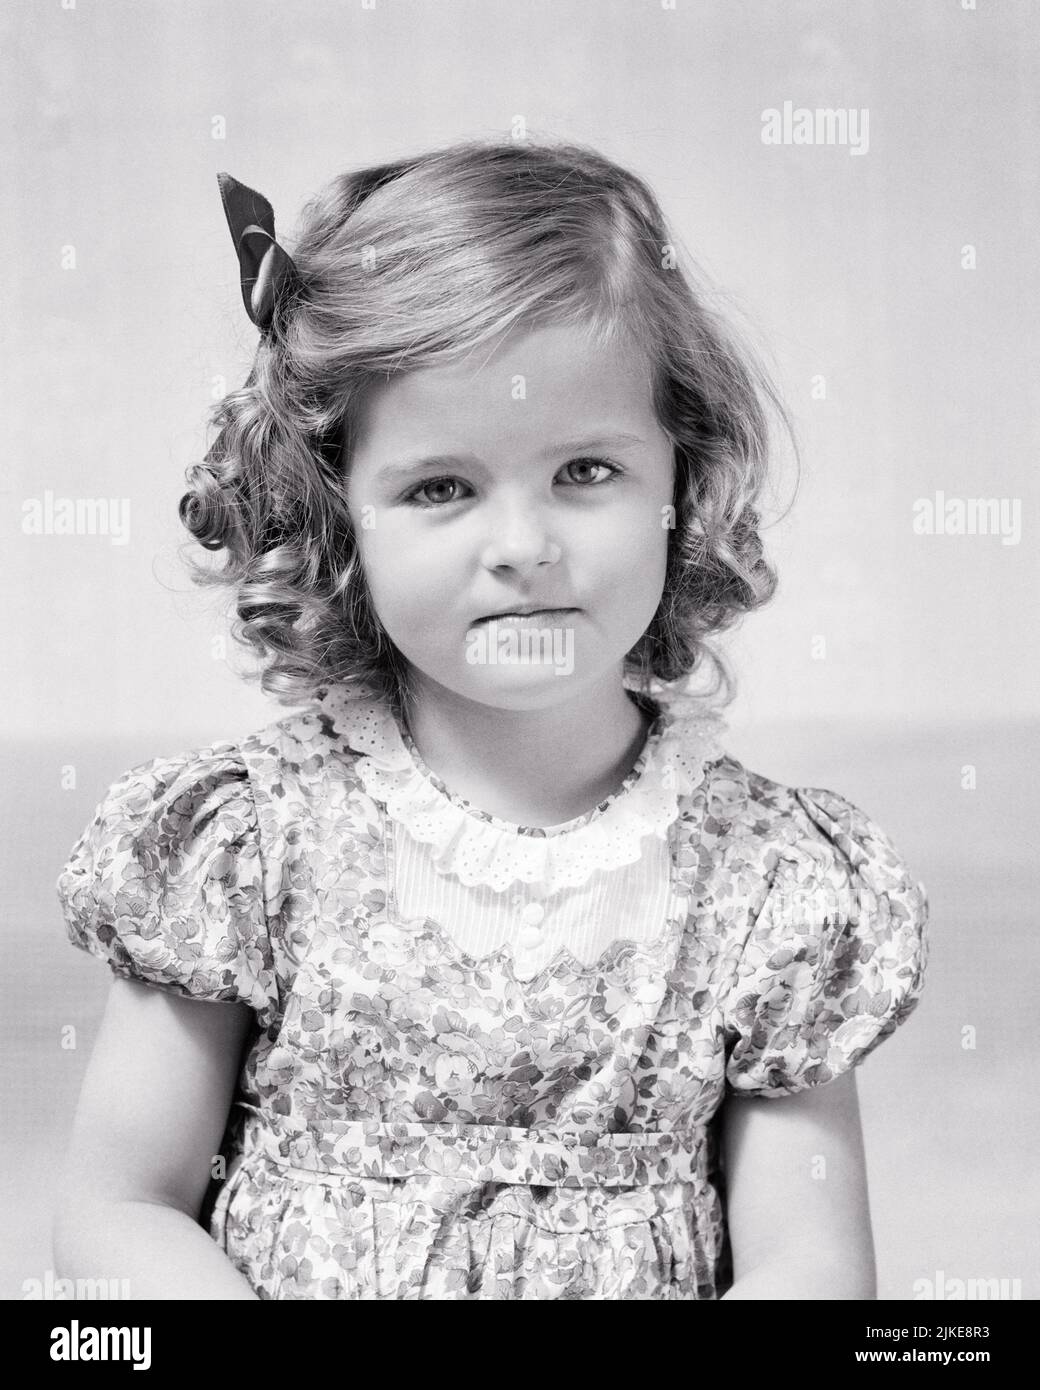 1940s SERIOUS RESOLUTE LITTLE GIRL DIRECTLY LOOKING AT CAMERA WITH A DETERMINED UNCOMPROMISING FACIAL EXPRESSION  - j9792 HAR001 HARS COURAGE KNOWLEDGE PRIDE STEADY DIRECTLY CONCEPTUAL STYLISH TRUE DETERMINED DEPENDABLE GROWTH JUVENILES RESOLUTE ATTITUDE BLACK AND WHITE CAUCASIAN ETHNICITY HAR001 OLD FASHIONED Stock Photo